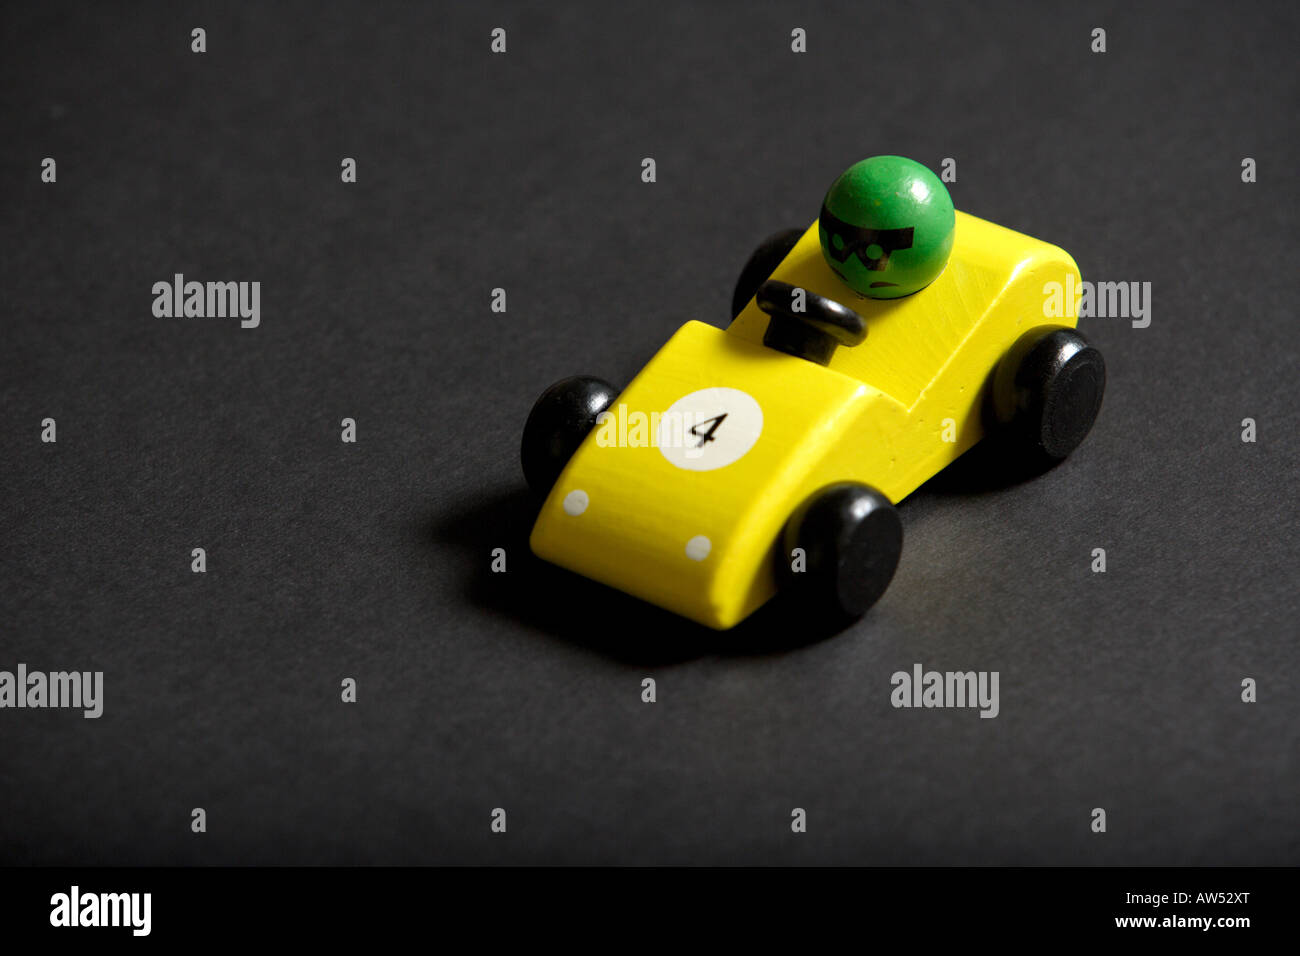 Toy car in the studio on a black background Stock Photo